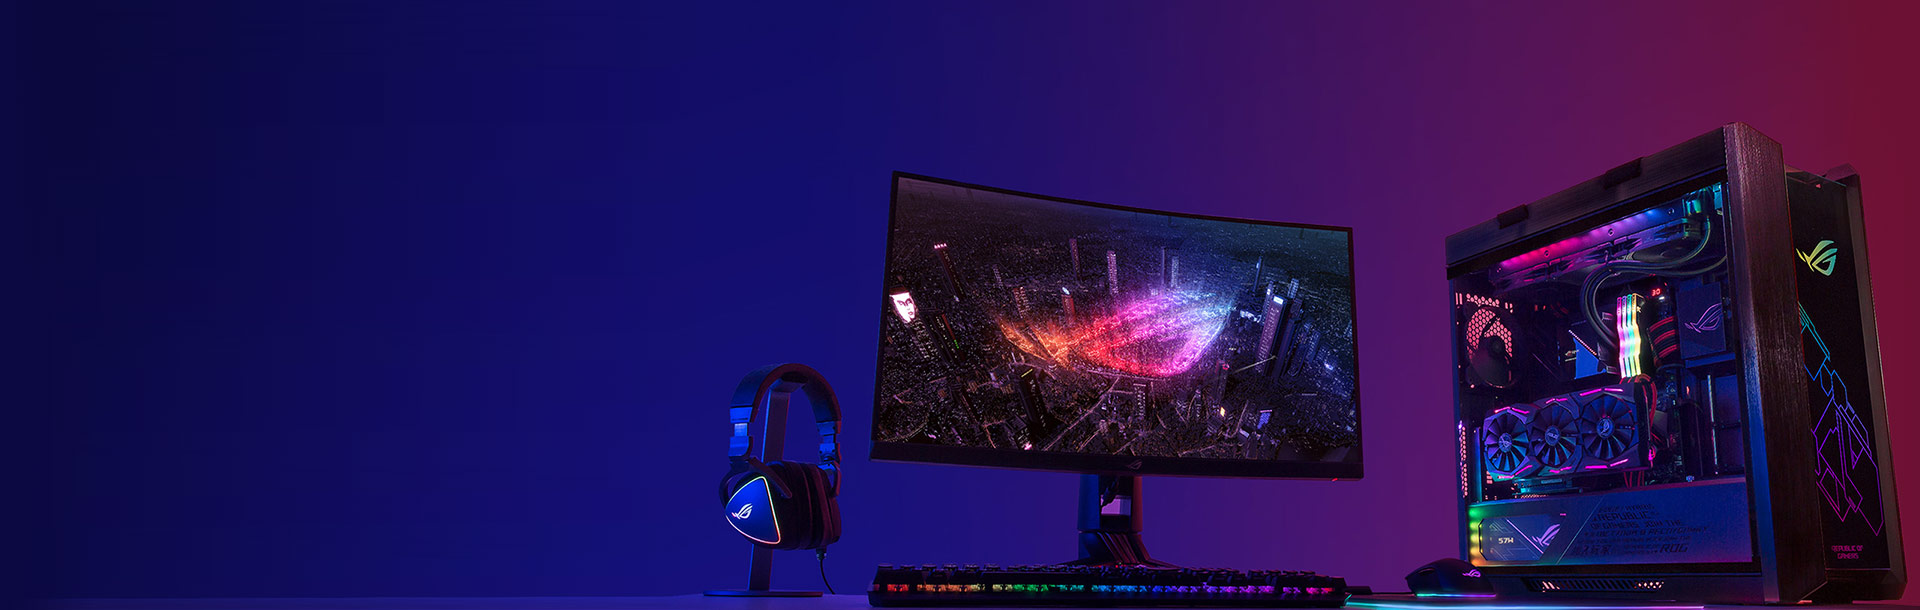 ROG Strix Z690-F Gaming WiFi features diverse ROG ecosystem